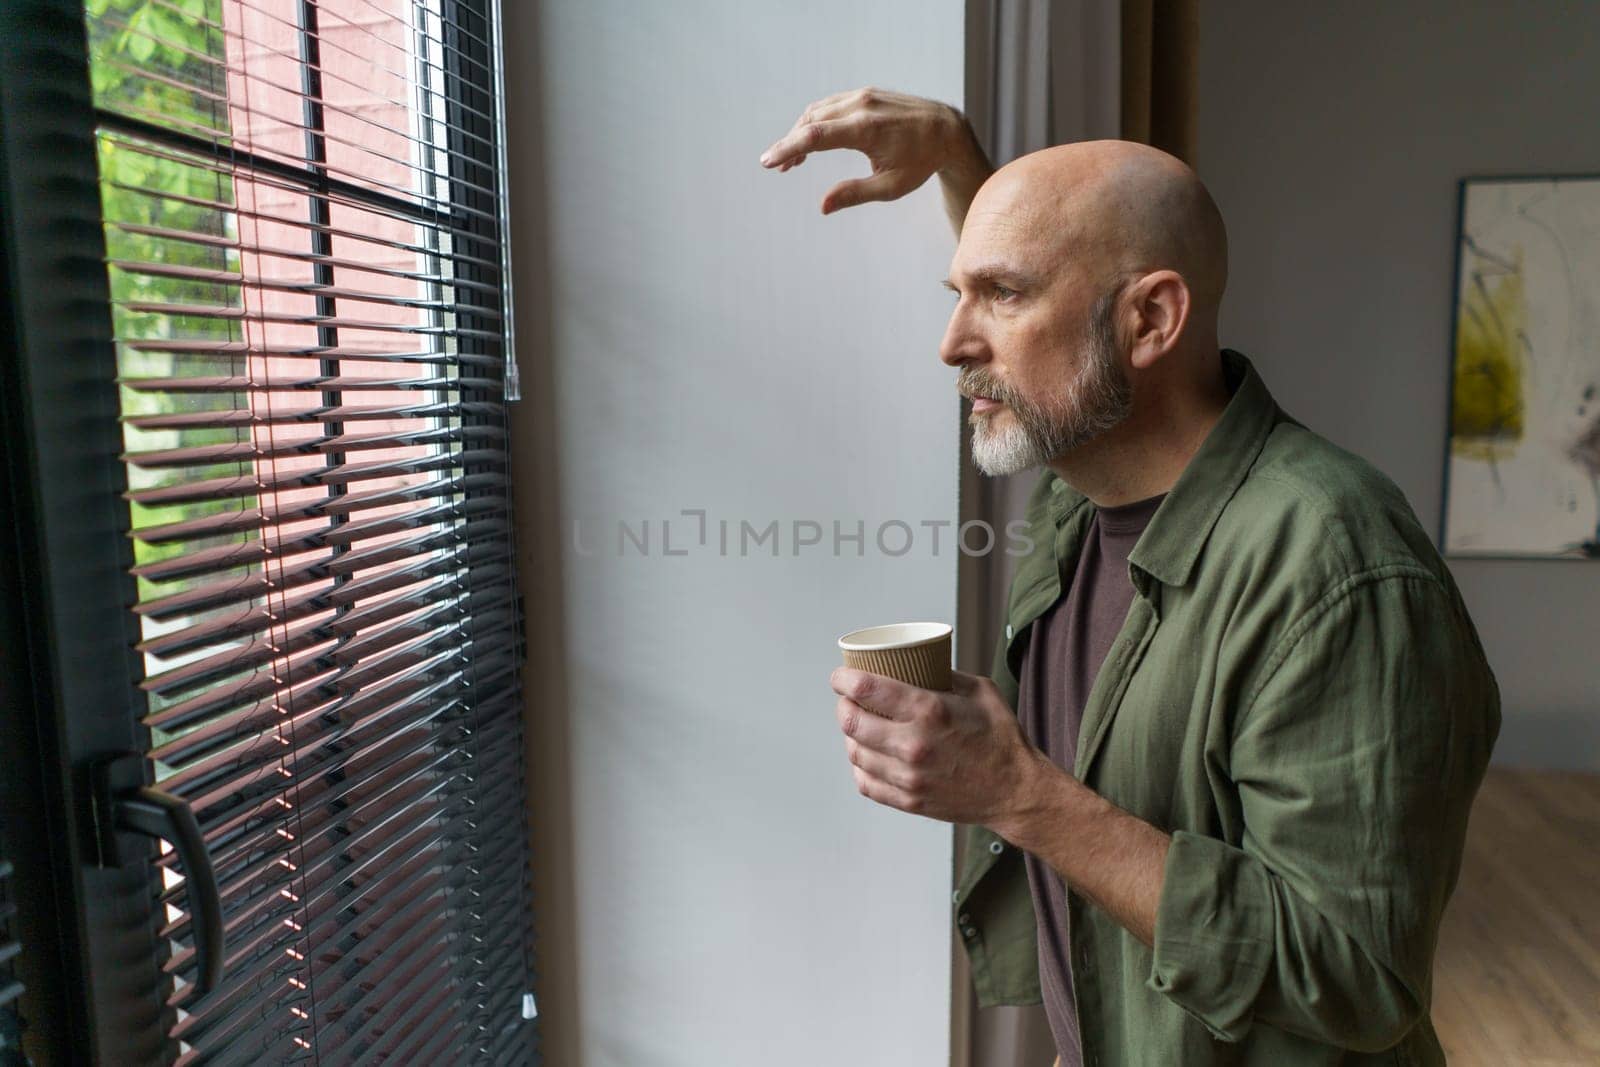 Happy old age, mature man radiates positivity from comfort of home. Positioned near window, emanating sense of contentment and joy. High quality photo